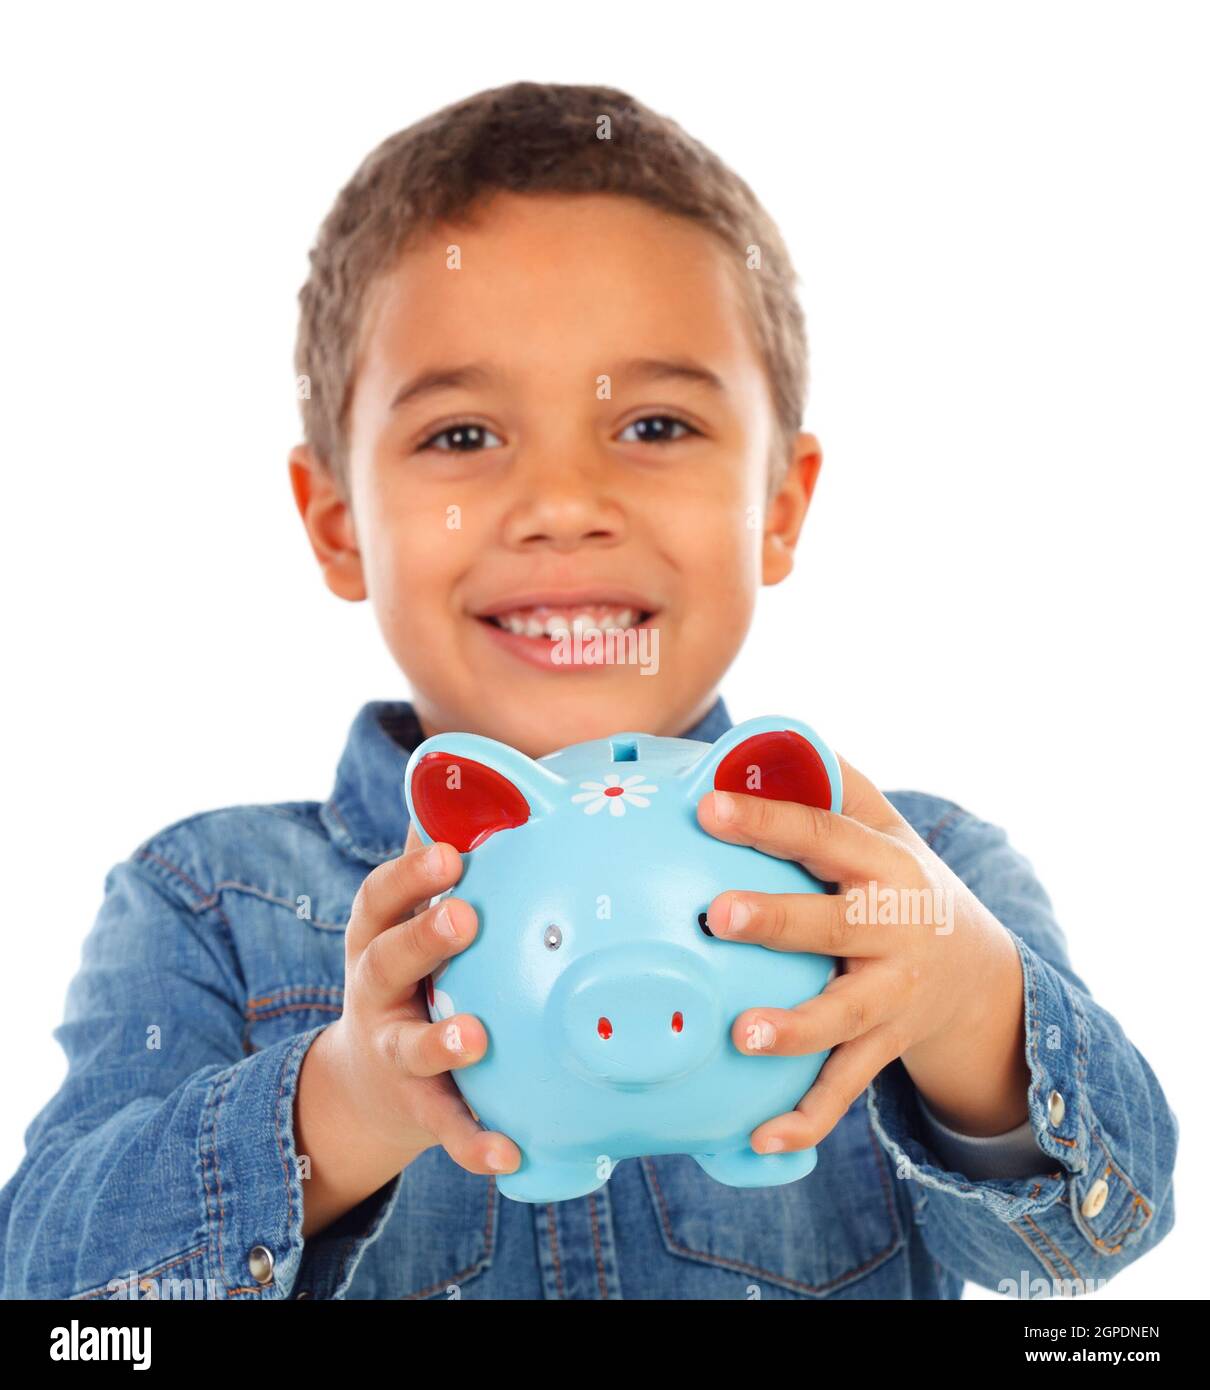 Happy child with blue money box isolated on a white background Stock Photo